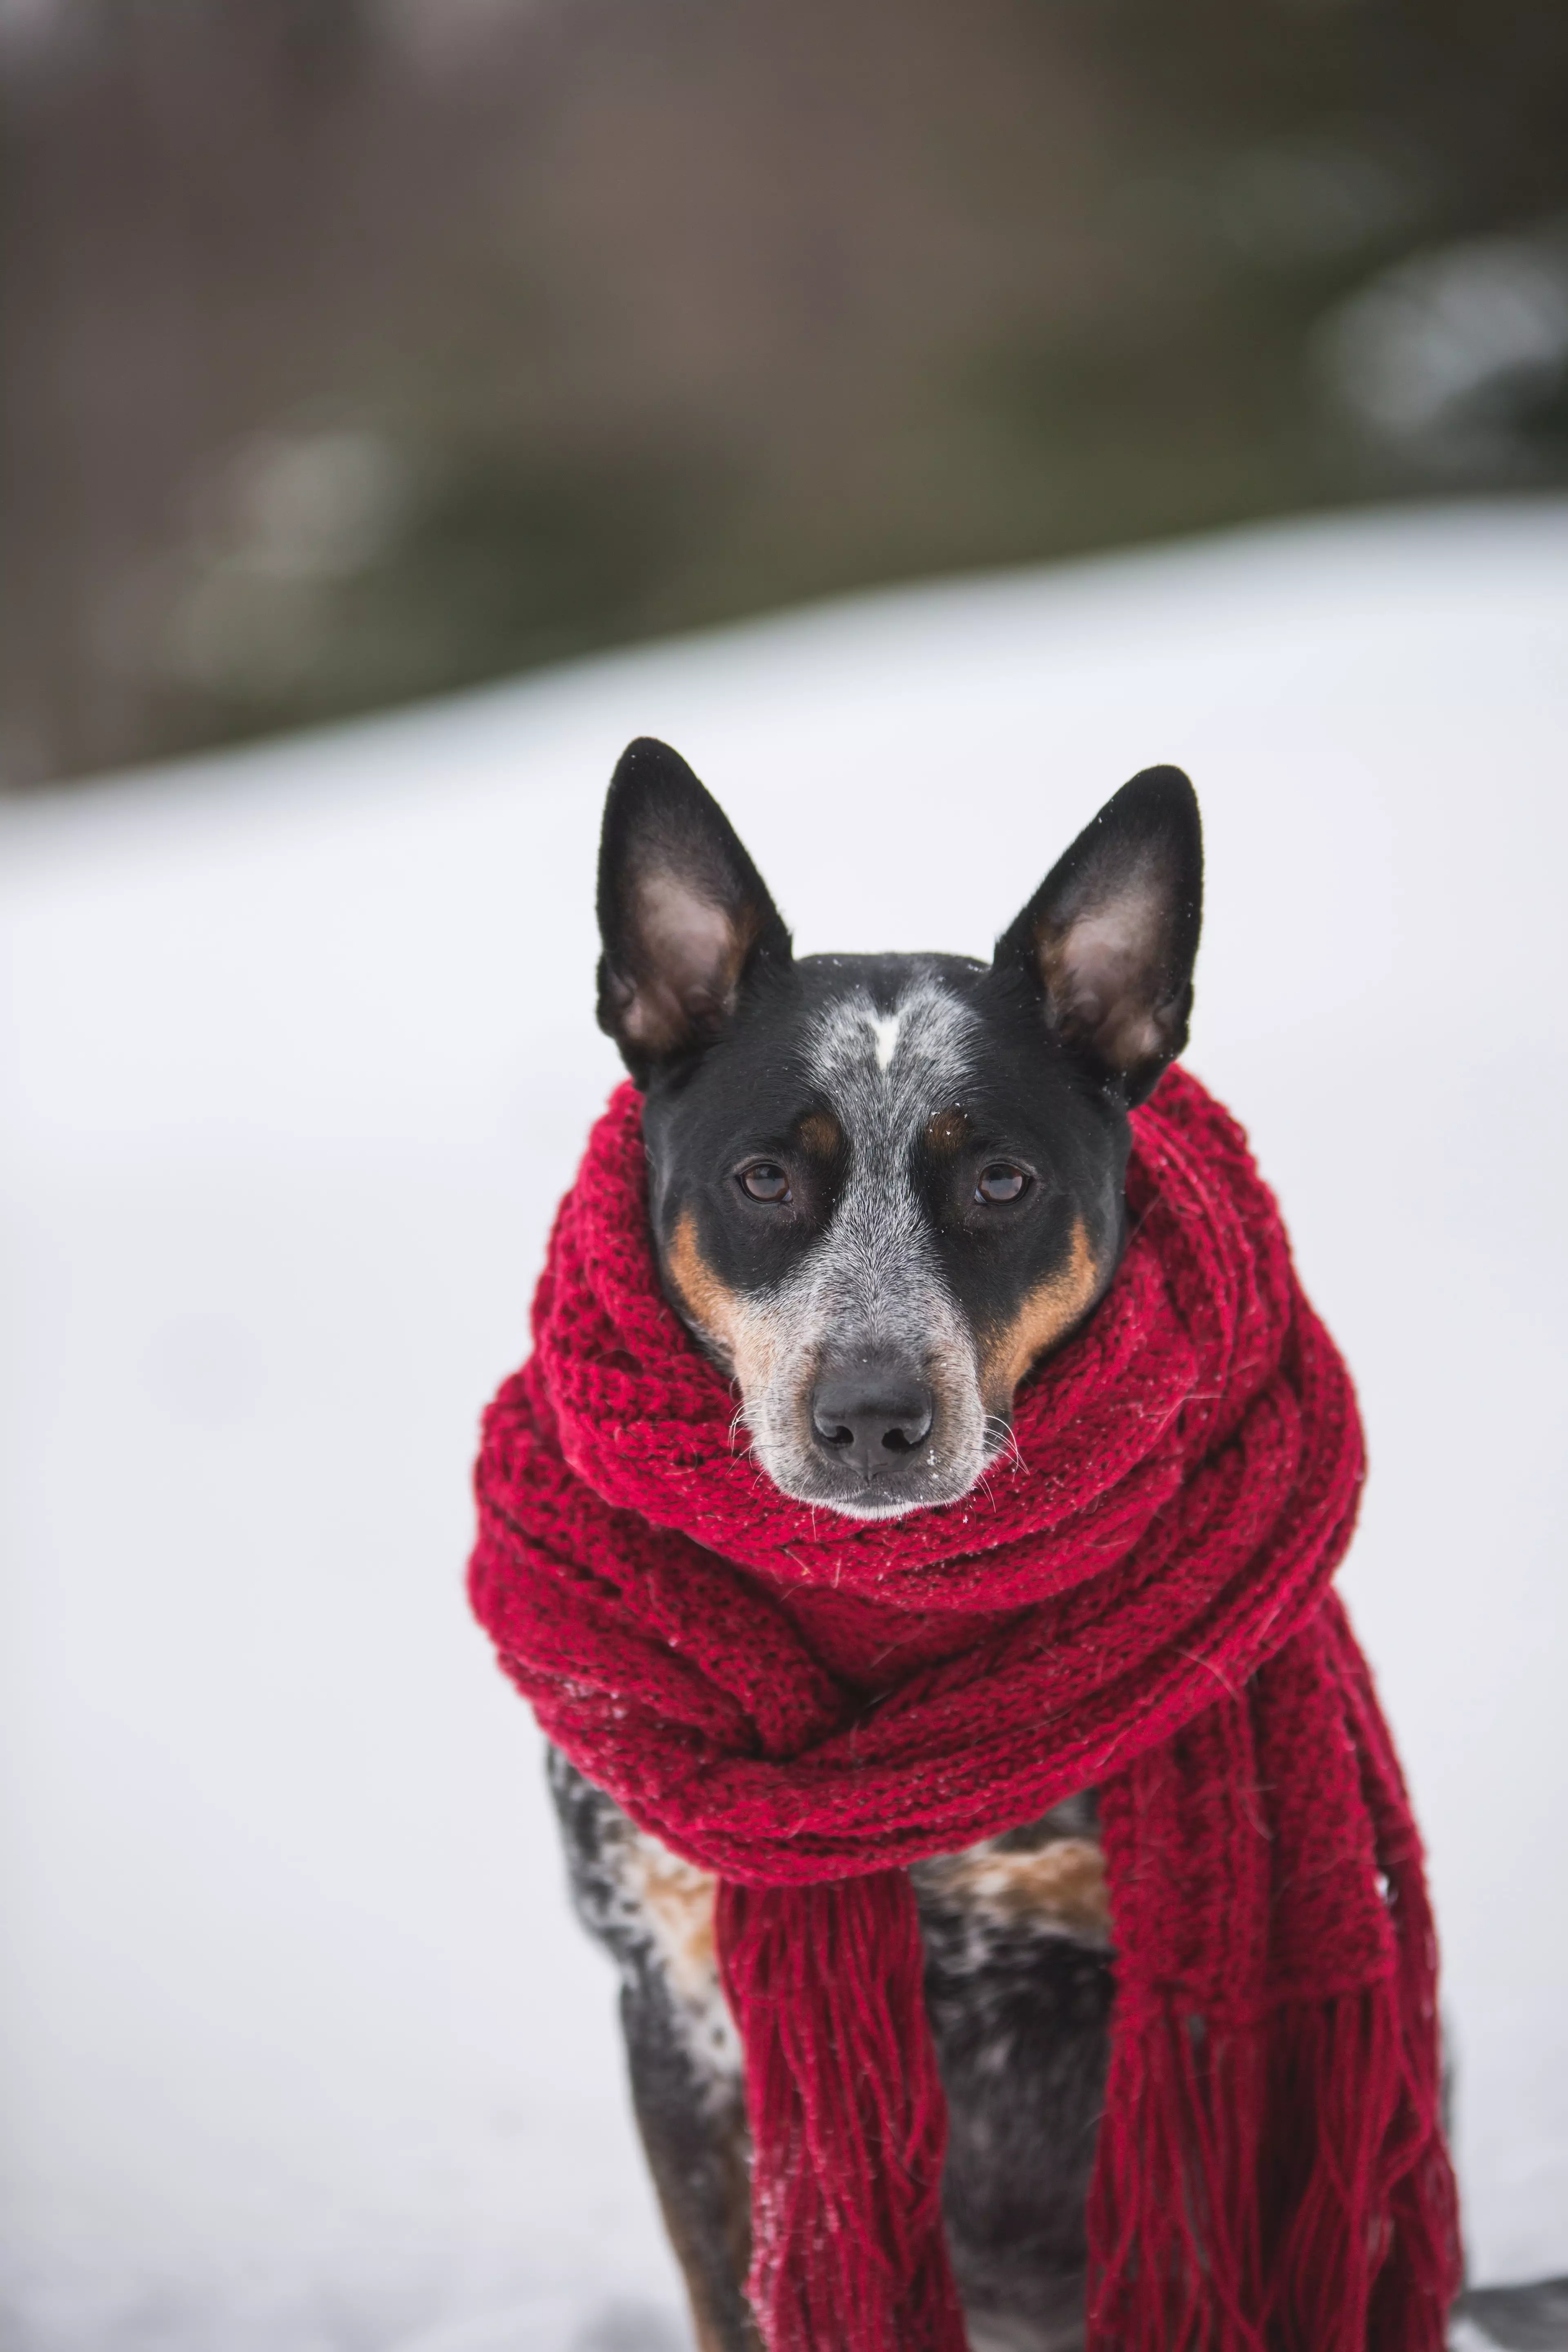 Make sure you wrap up warm like this pup (